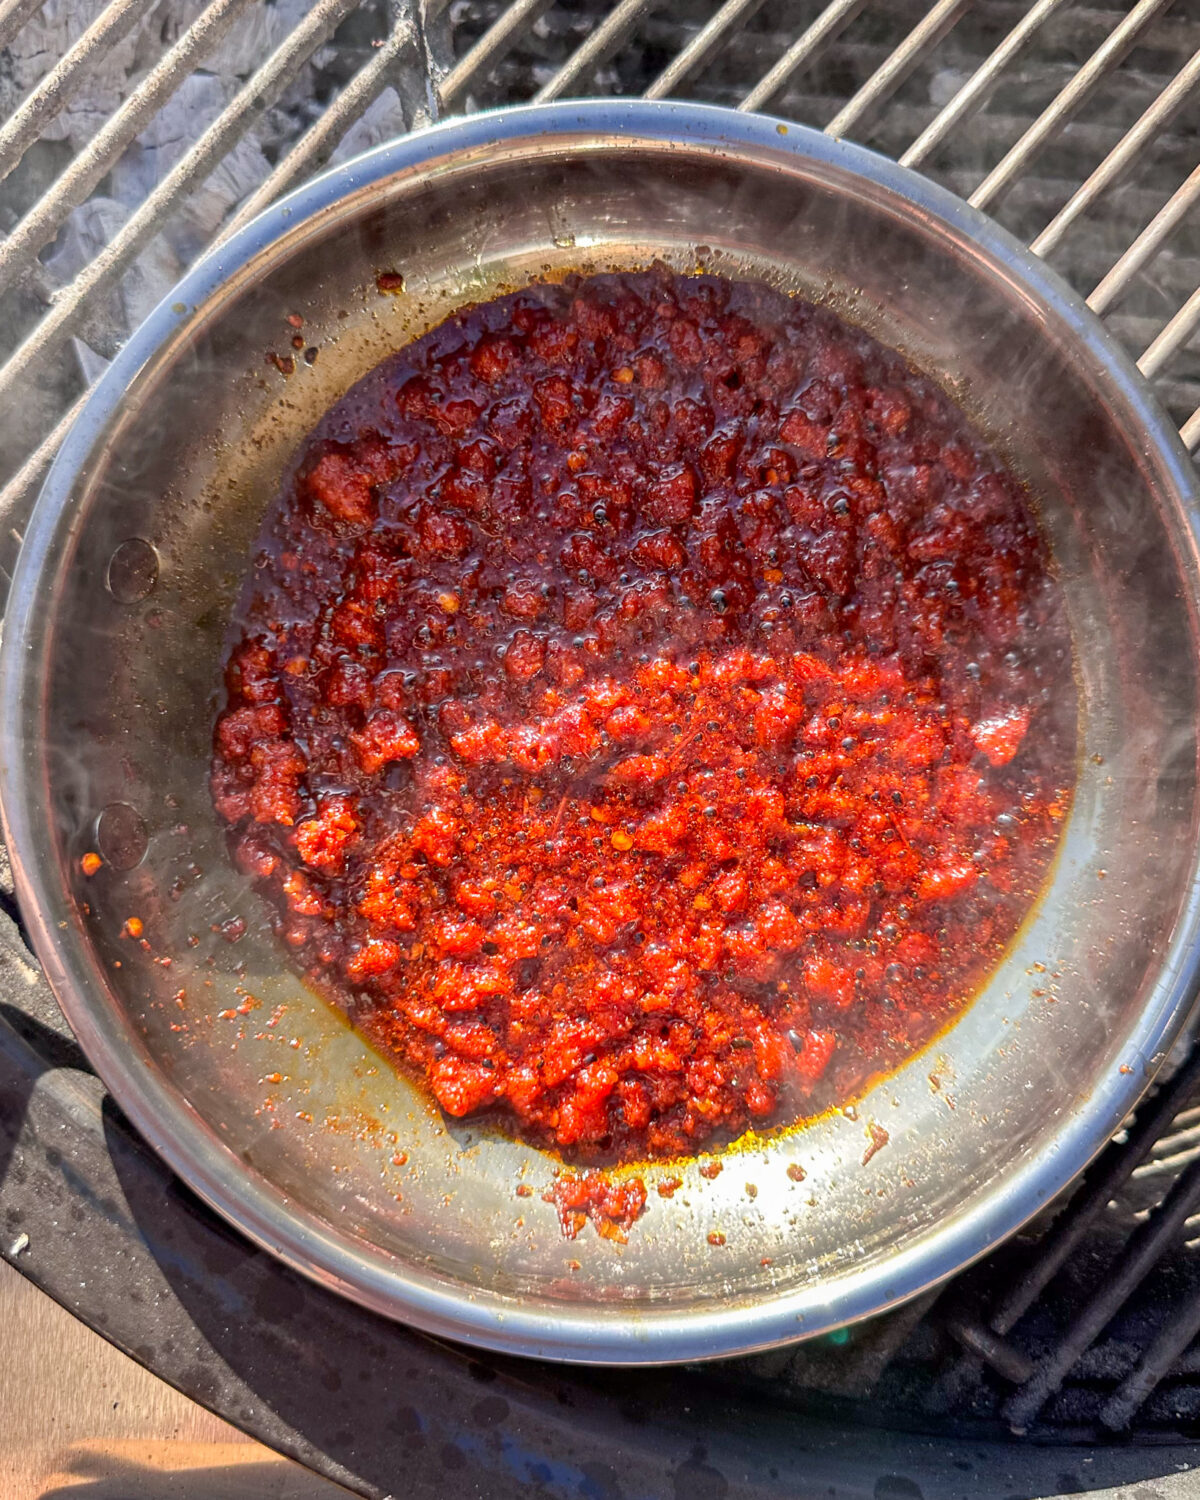 Place the 'Nduja crumbles in a small skillet over the direct heat. Cook until it starts to melt and release its oils